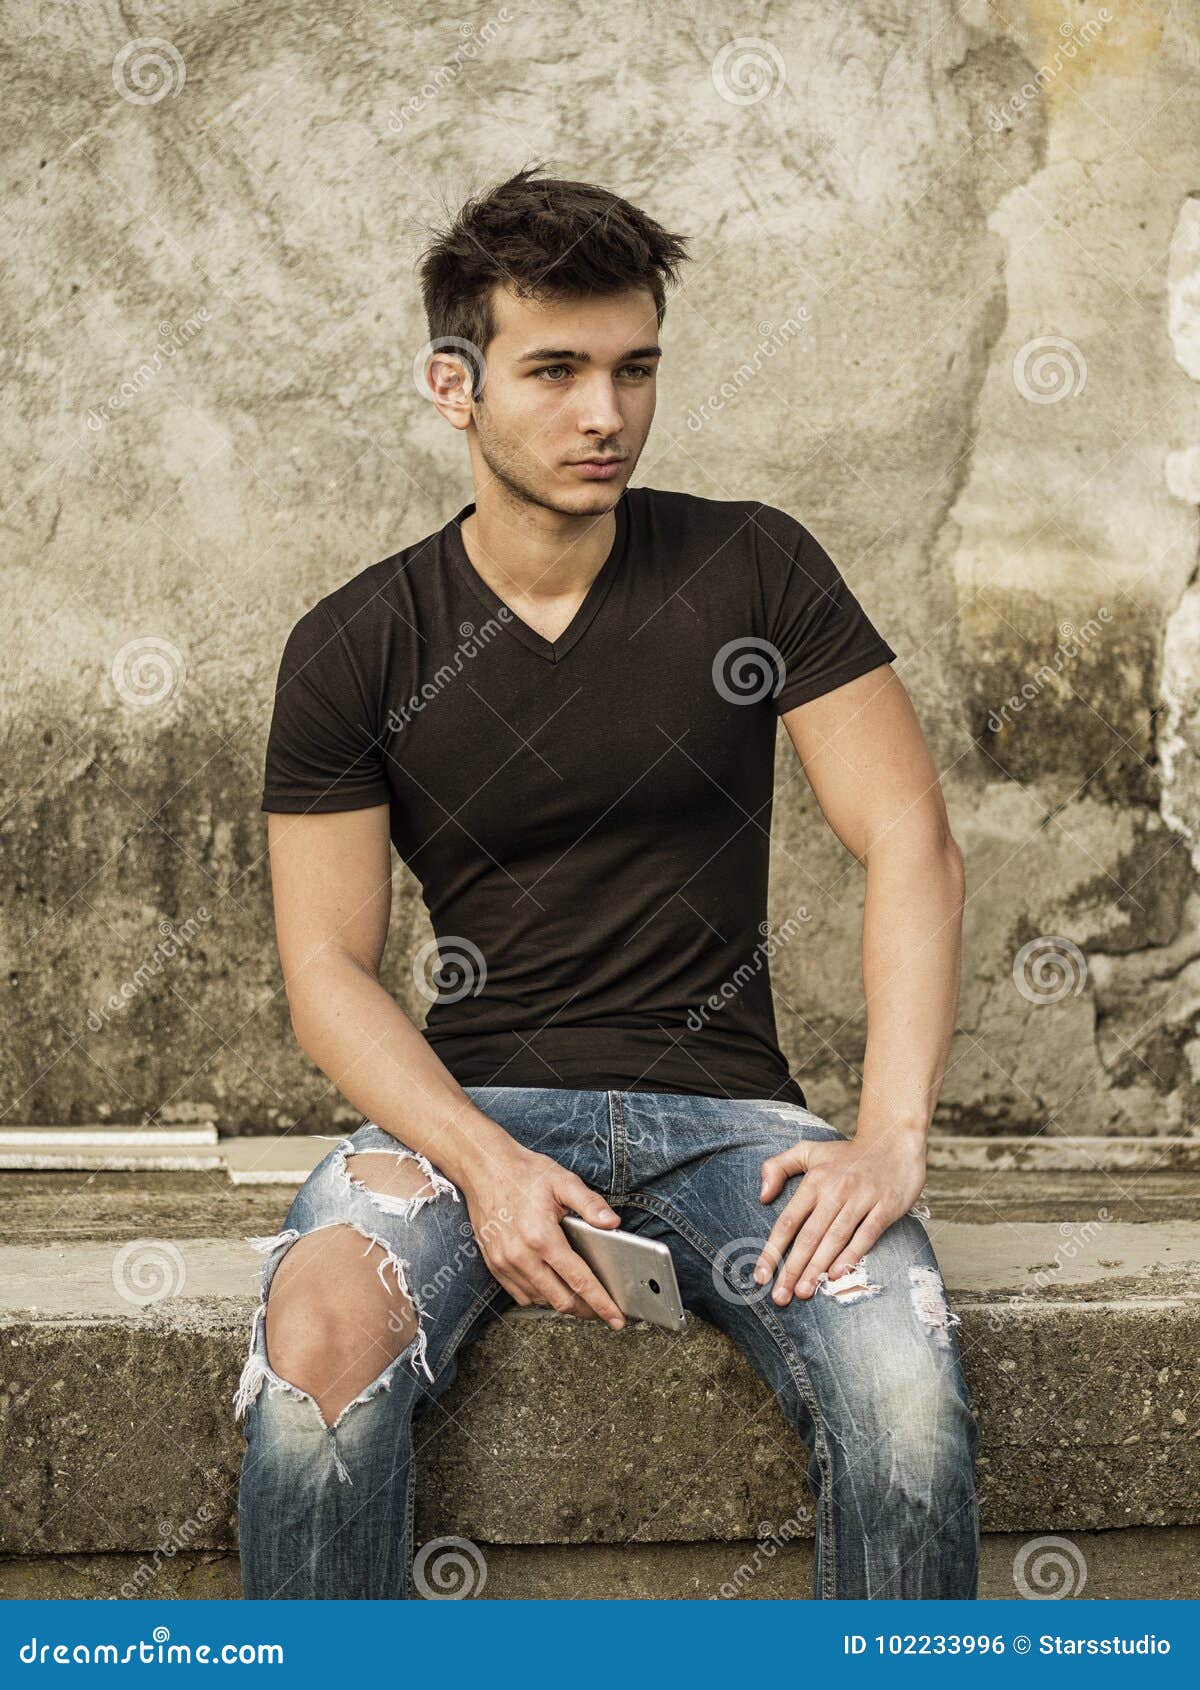 Smiling Young Man Sitting on Concrete Steps. Stock Photo - Image of ...